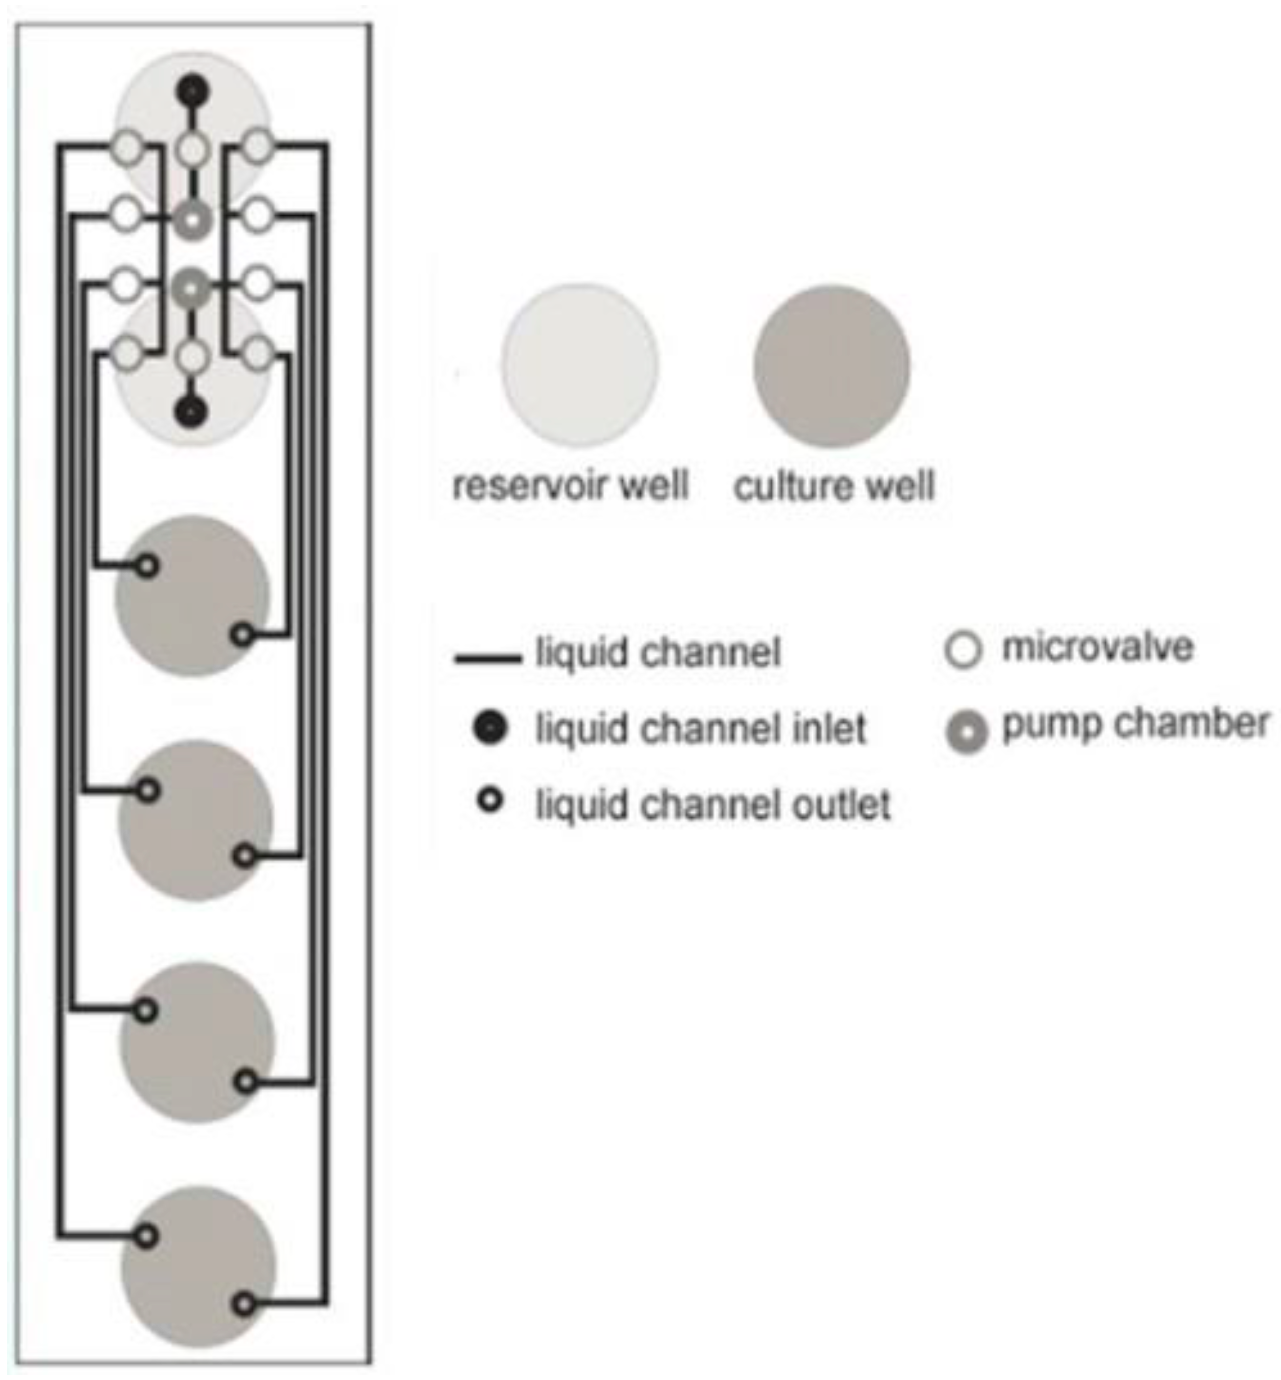 Figure 2 Schematic illustration of the microfluidic channels of the microfluidic FlowerPlate